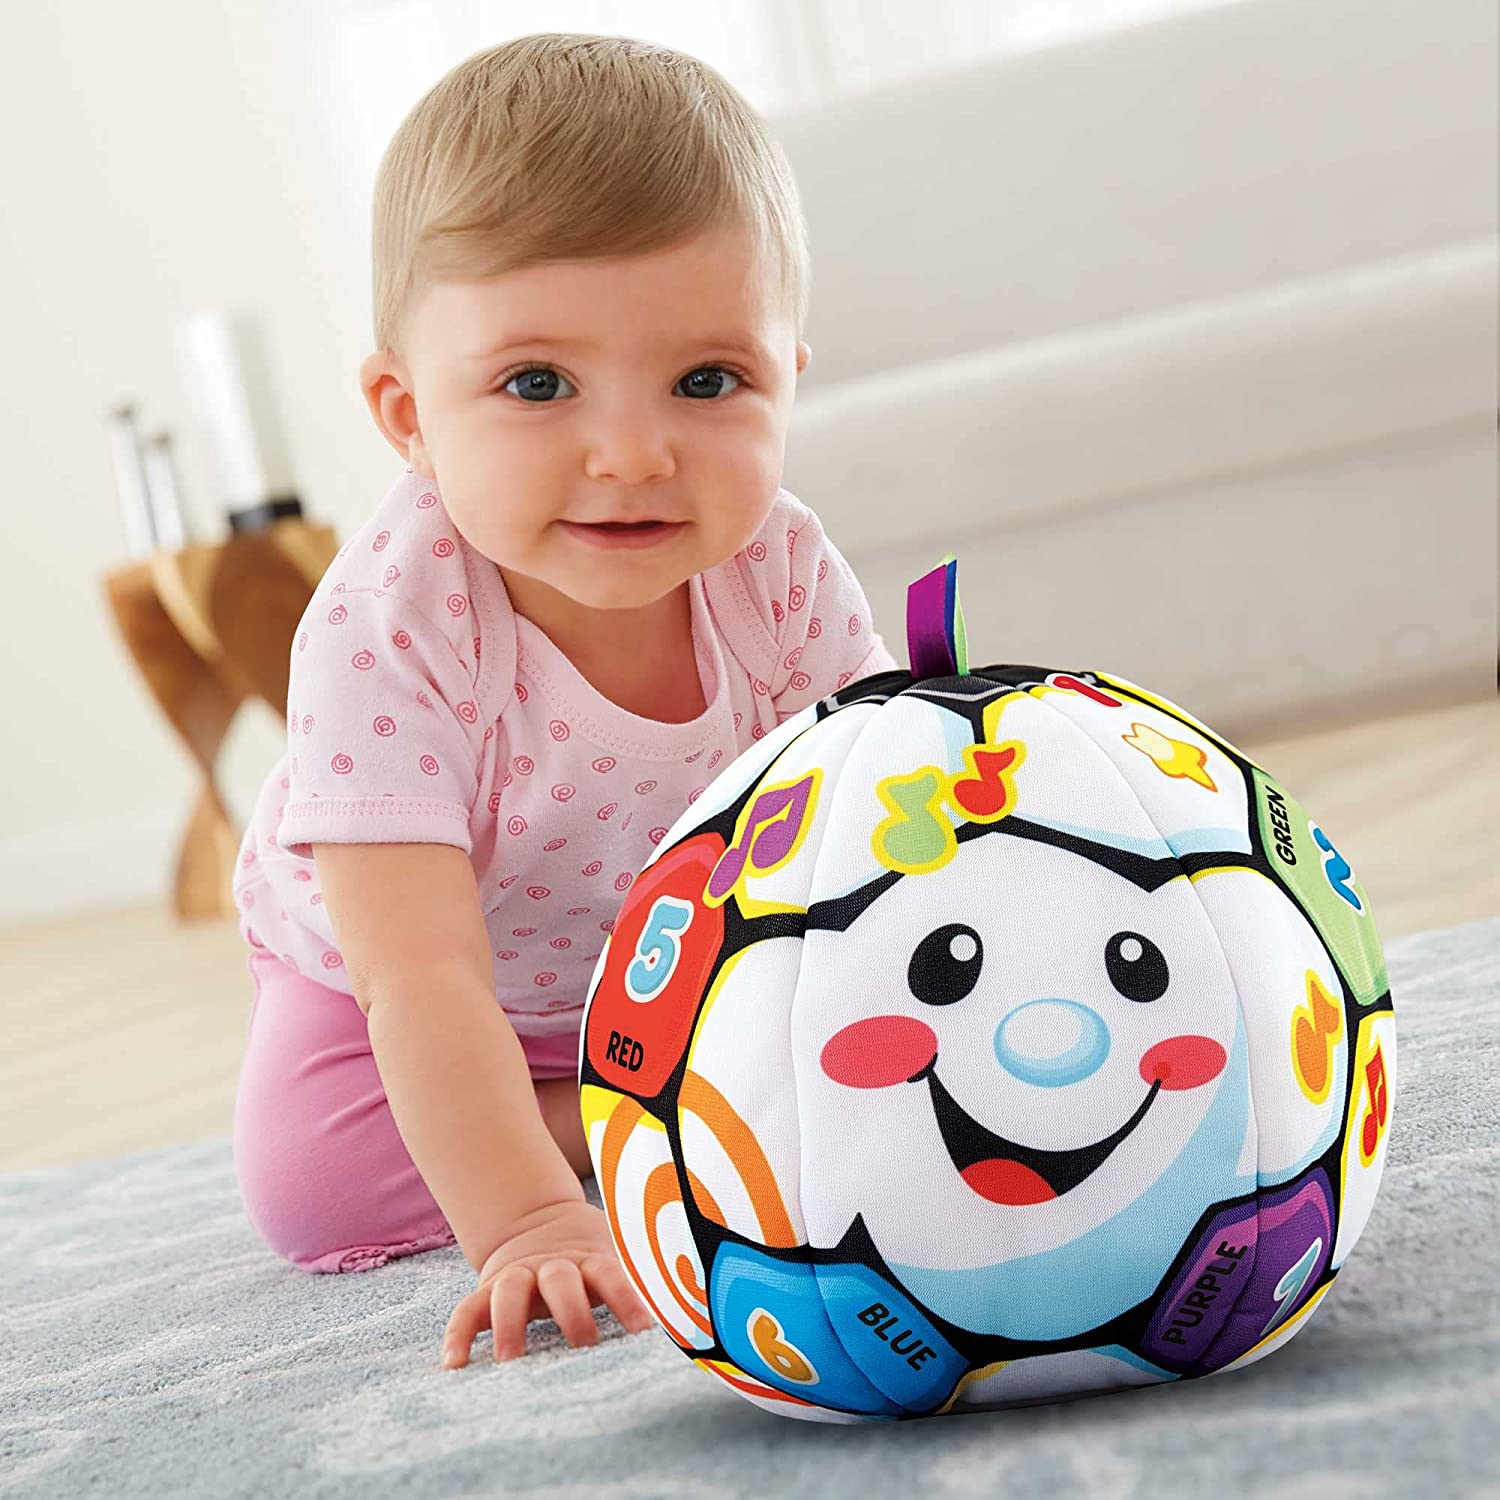 Laugh & Learn Baby To Toddler Toy Singin’ Soccer Ball Plush With Music & Educational Phrases For Ages 6+ Months